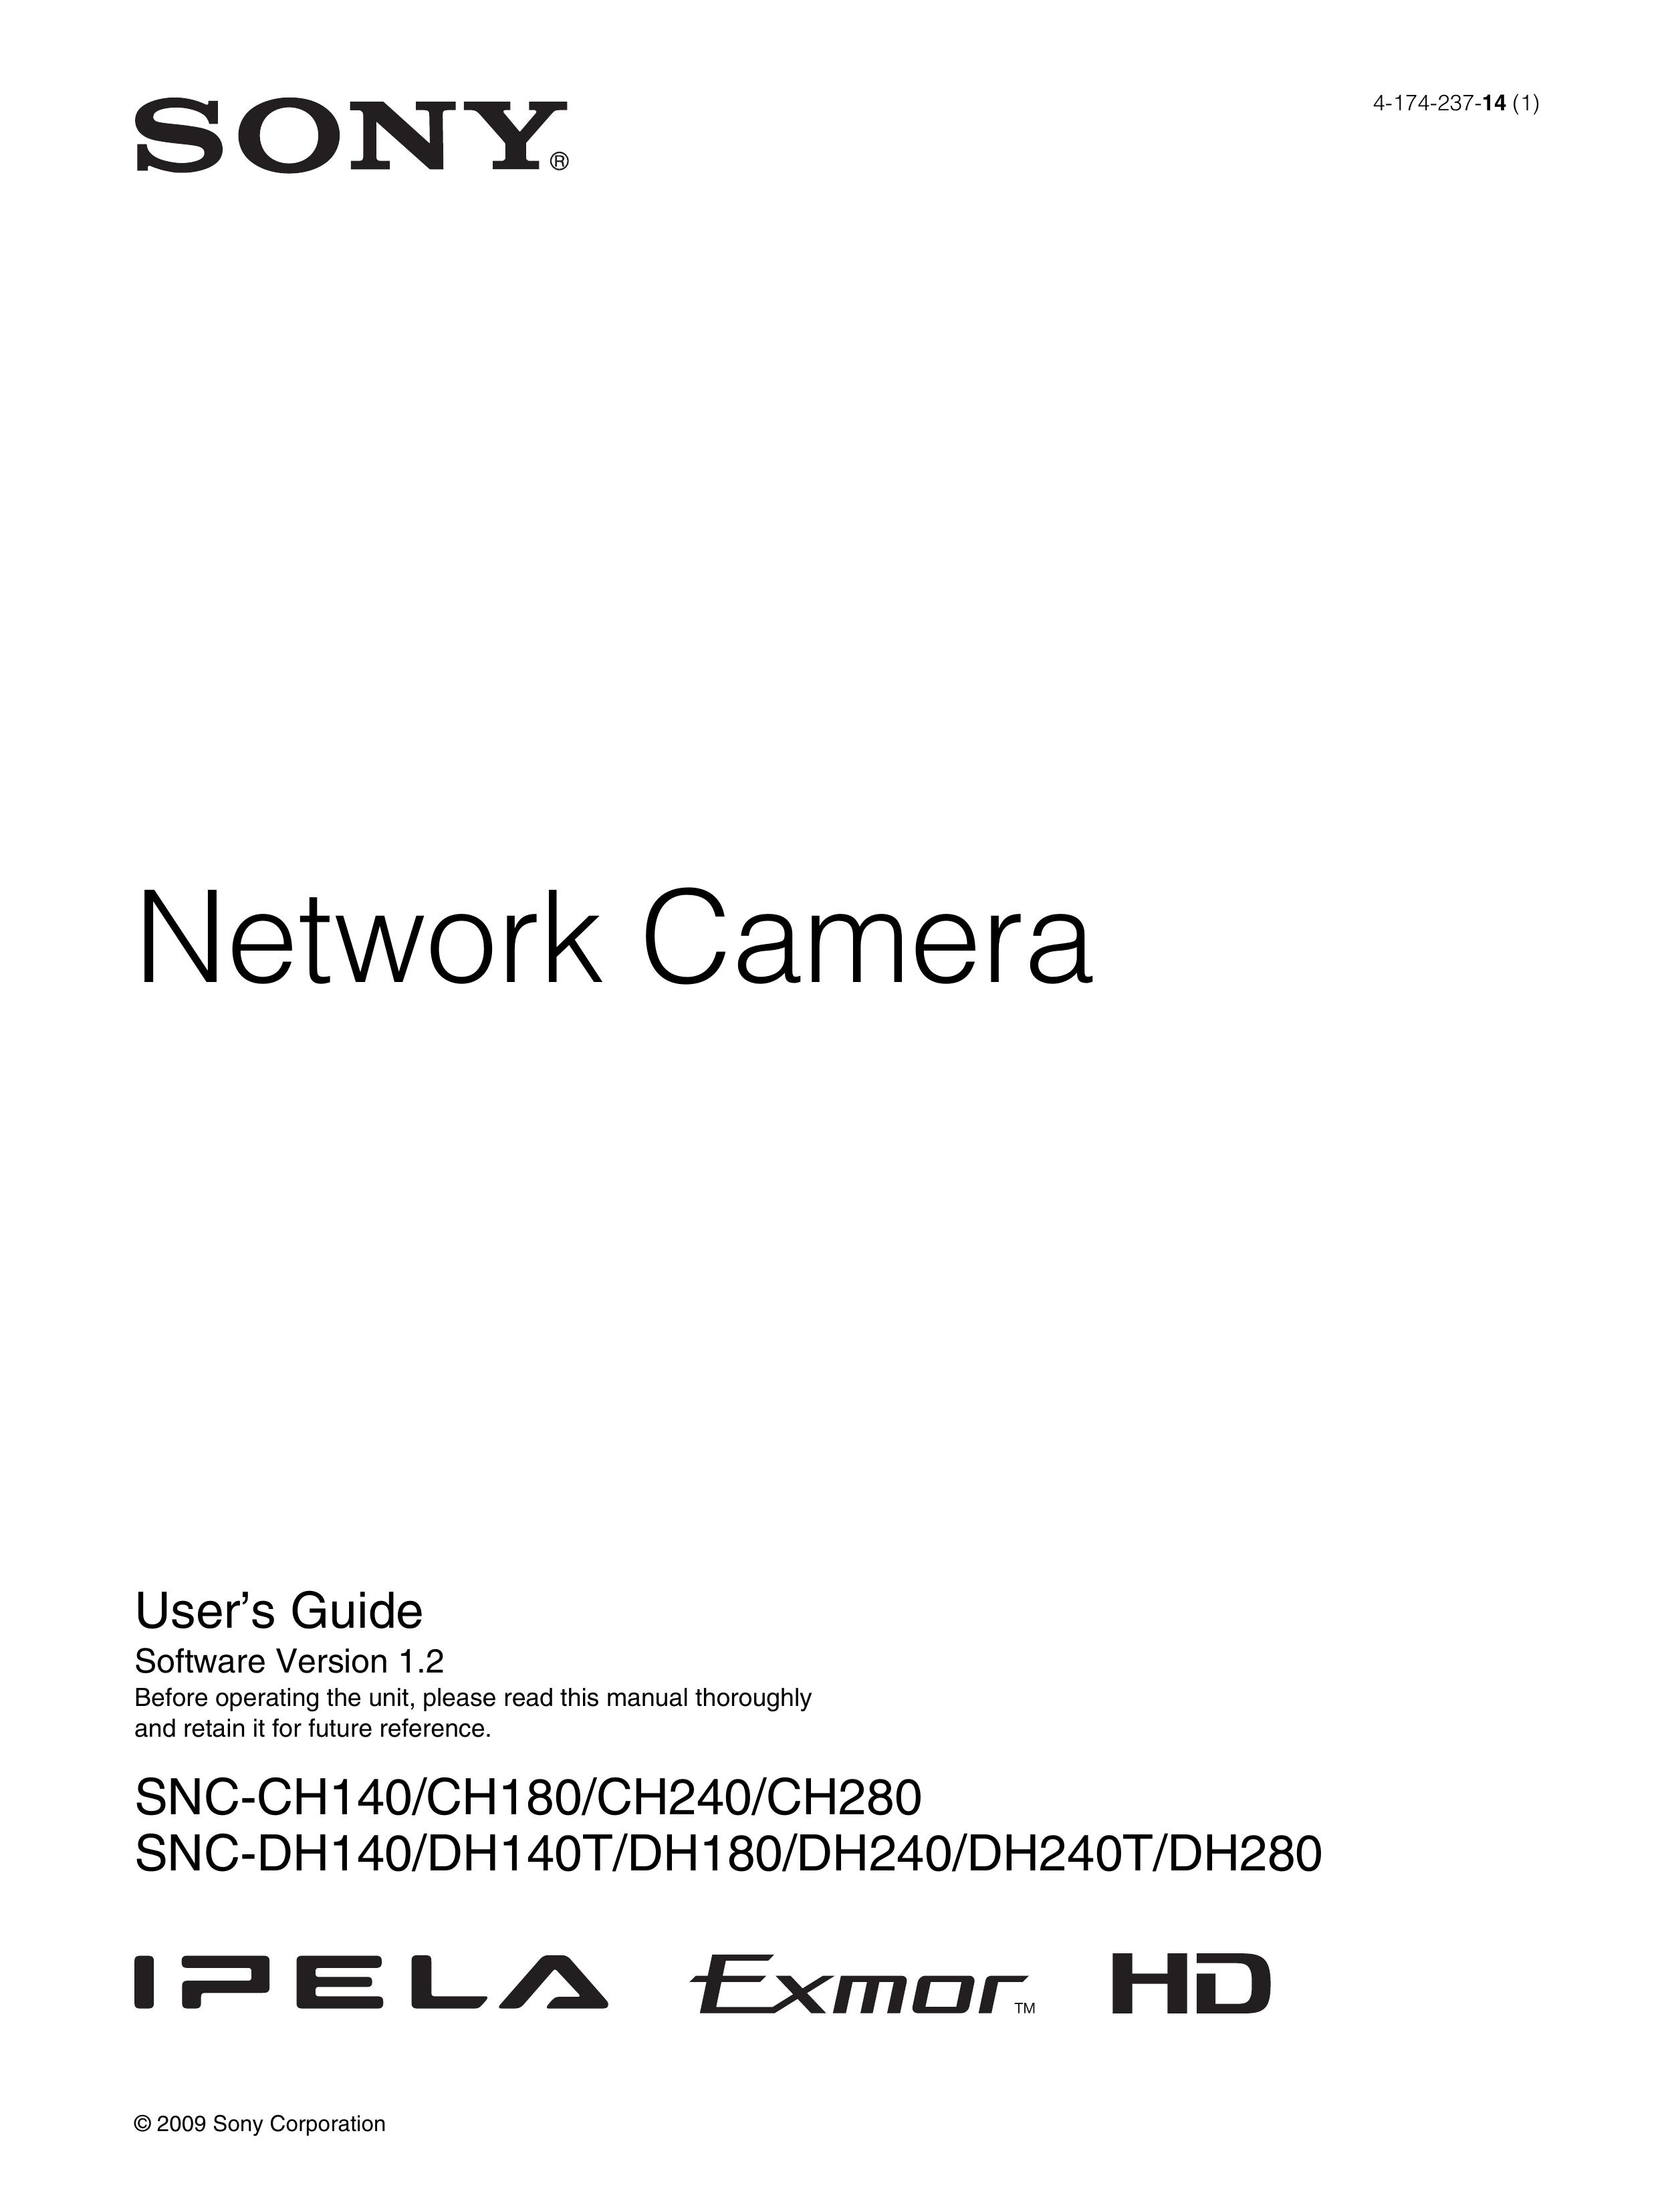 Sony DH240 Security Camera User Manual